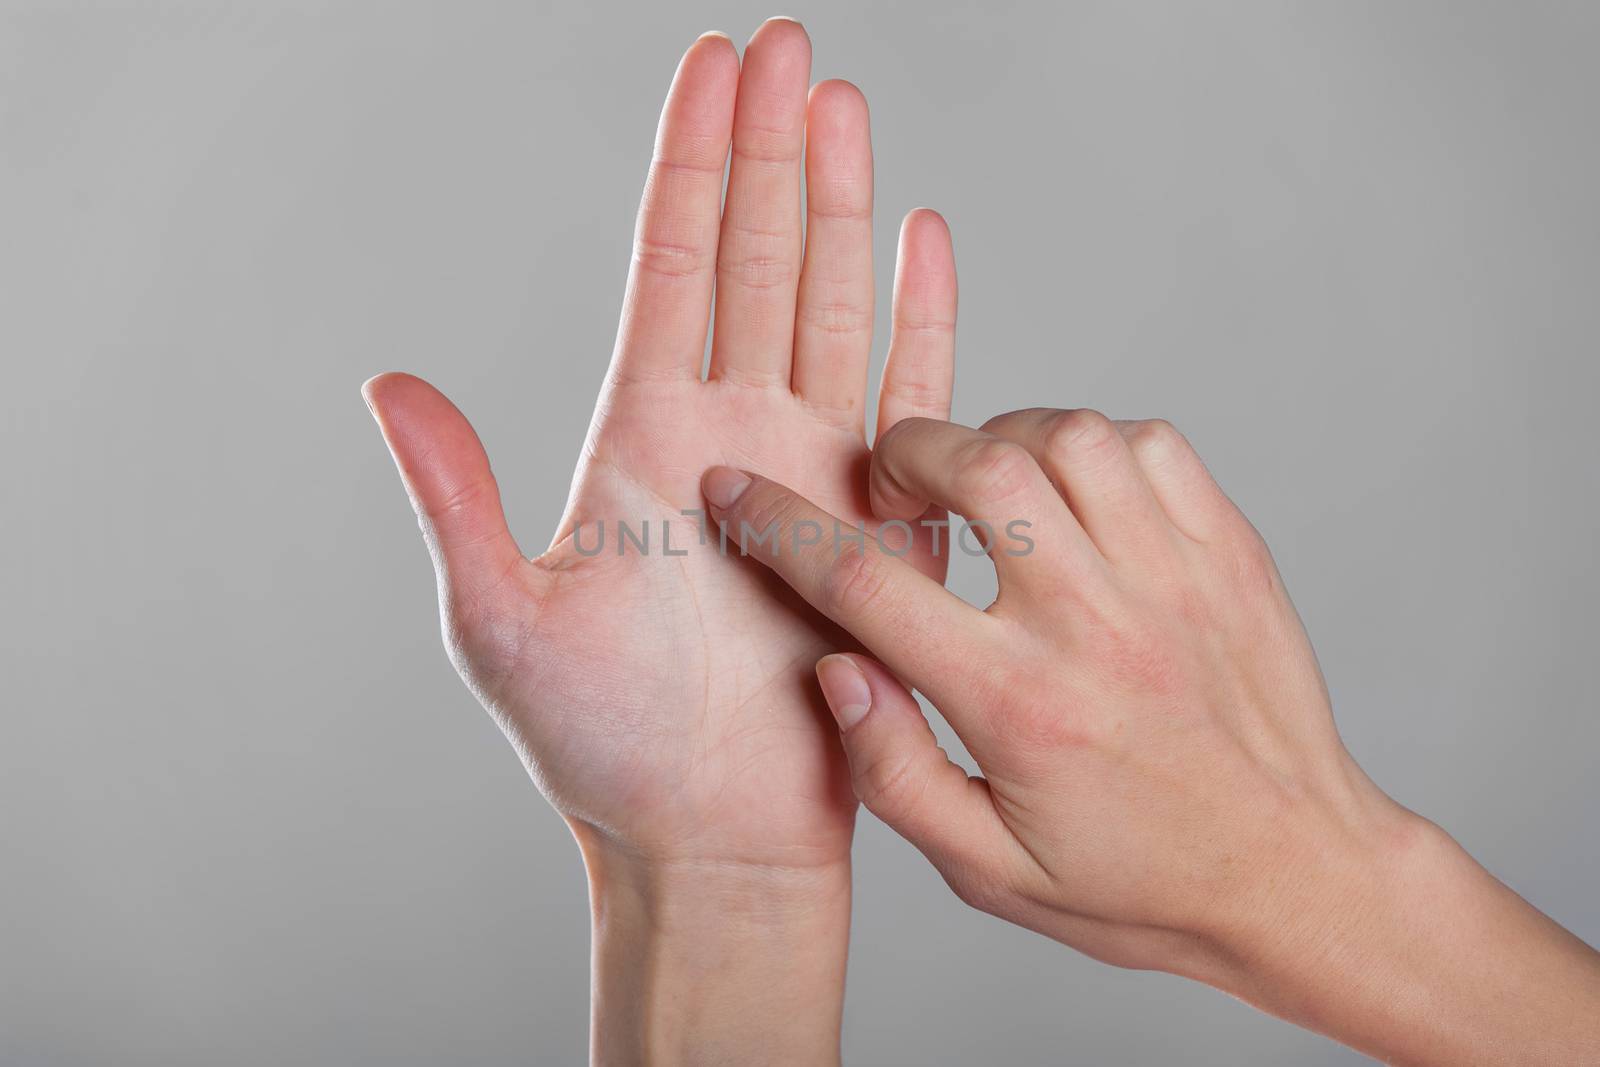 Female finger touches an open hand on gray background.